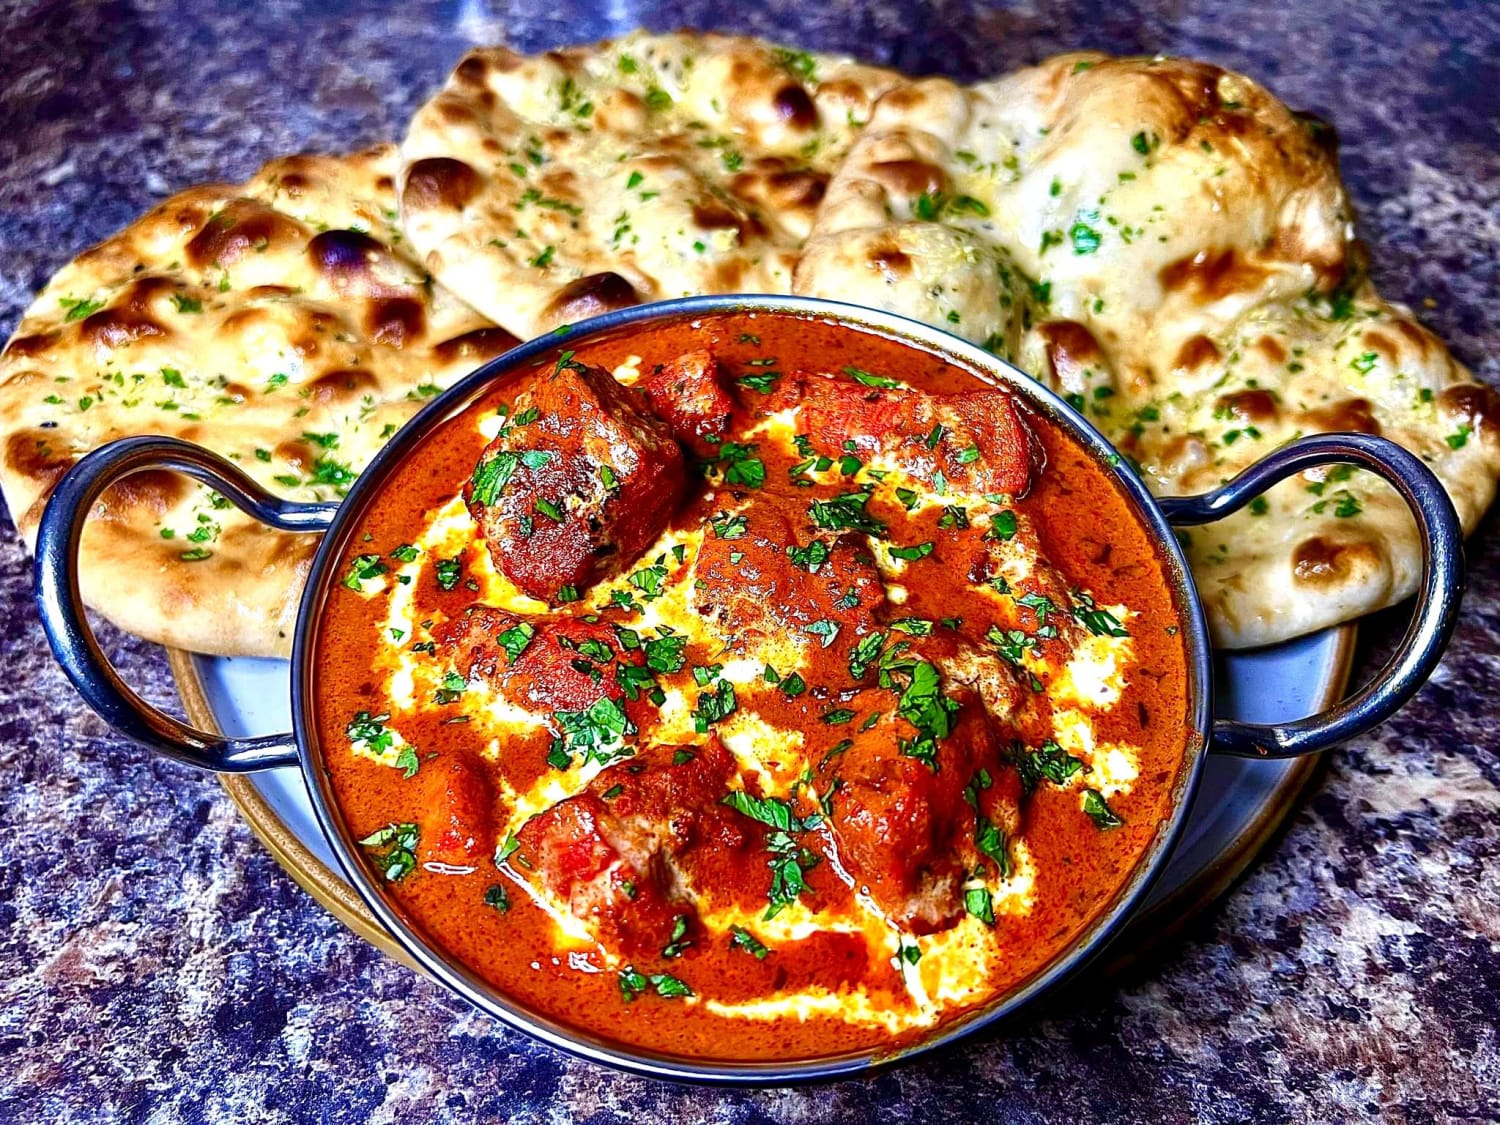 Chicken tikka masala with garlic and coriander naans. All made from scratch.